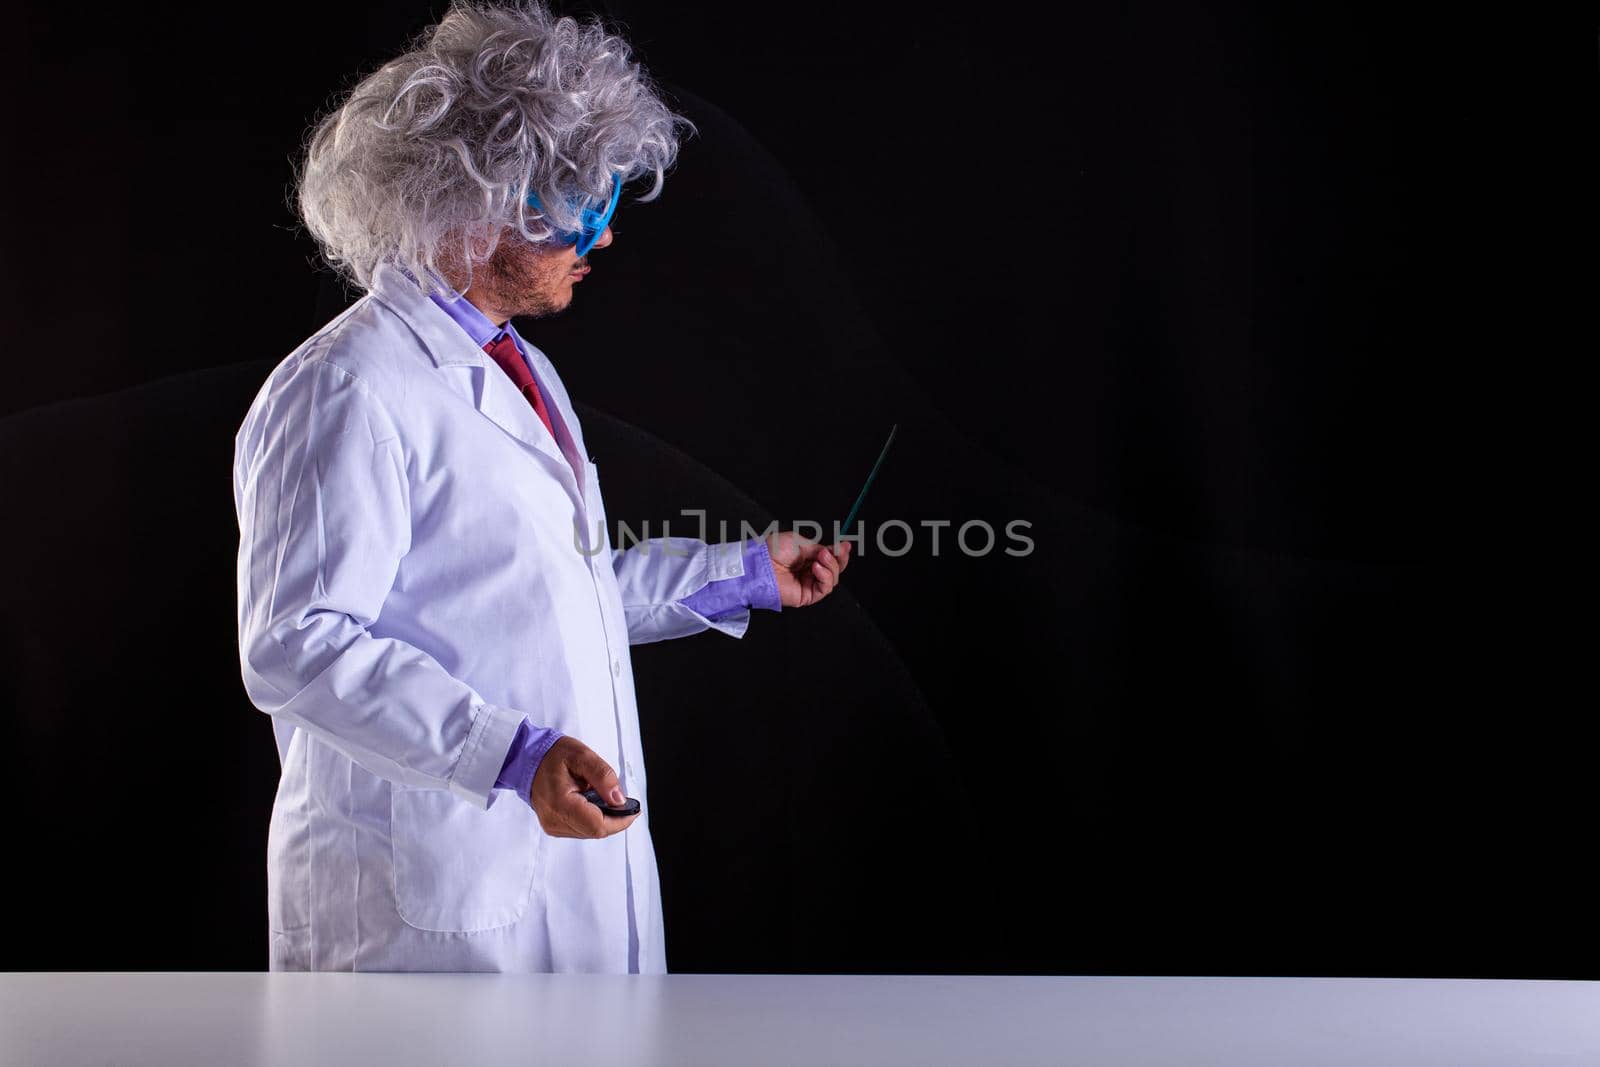 Crazy science teacher in white coat with unkempt hair in funny eye glasses holding a wand to point at the blackboard